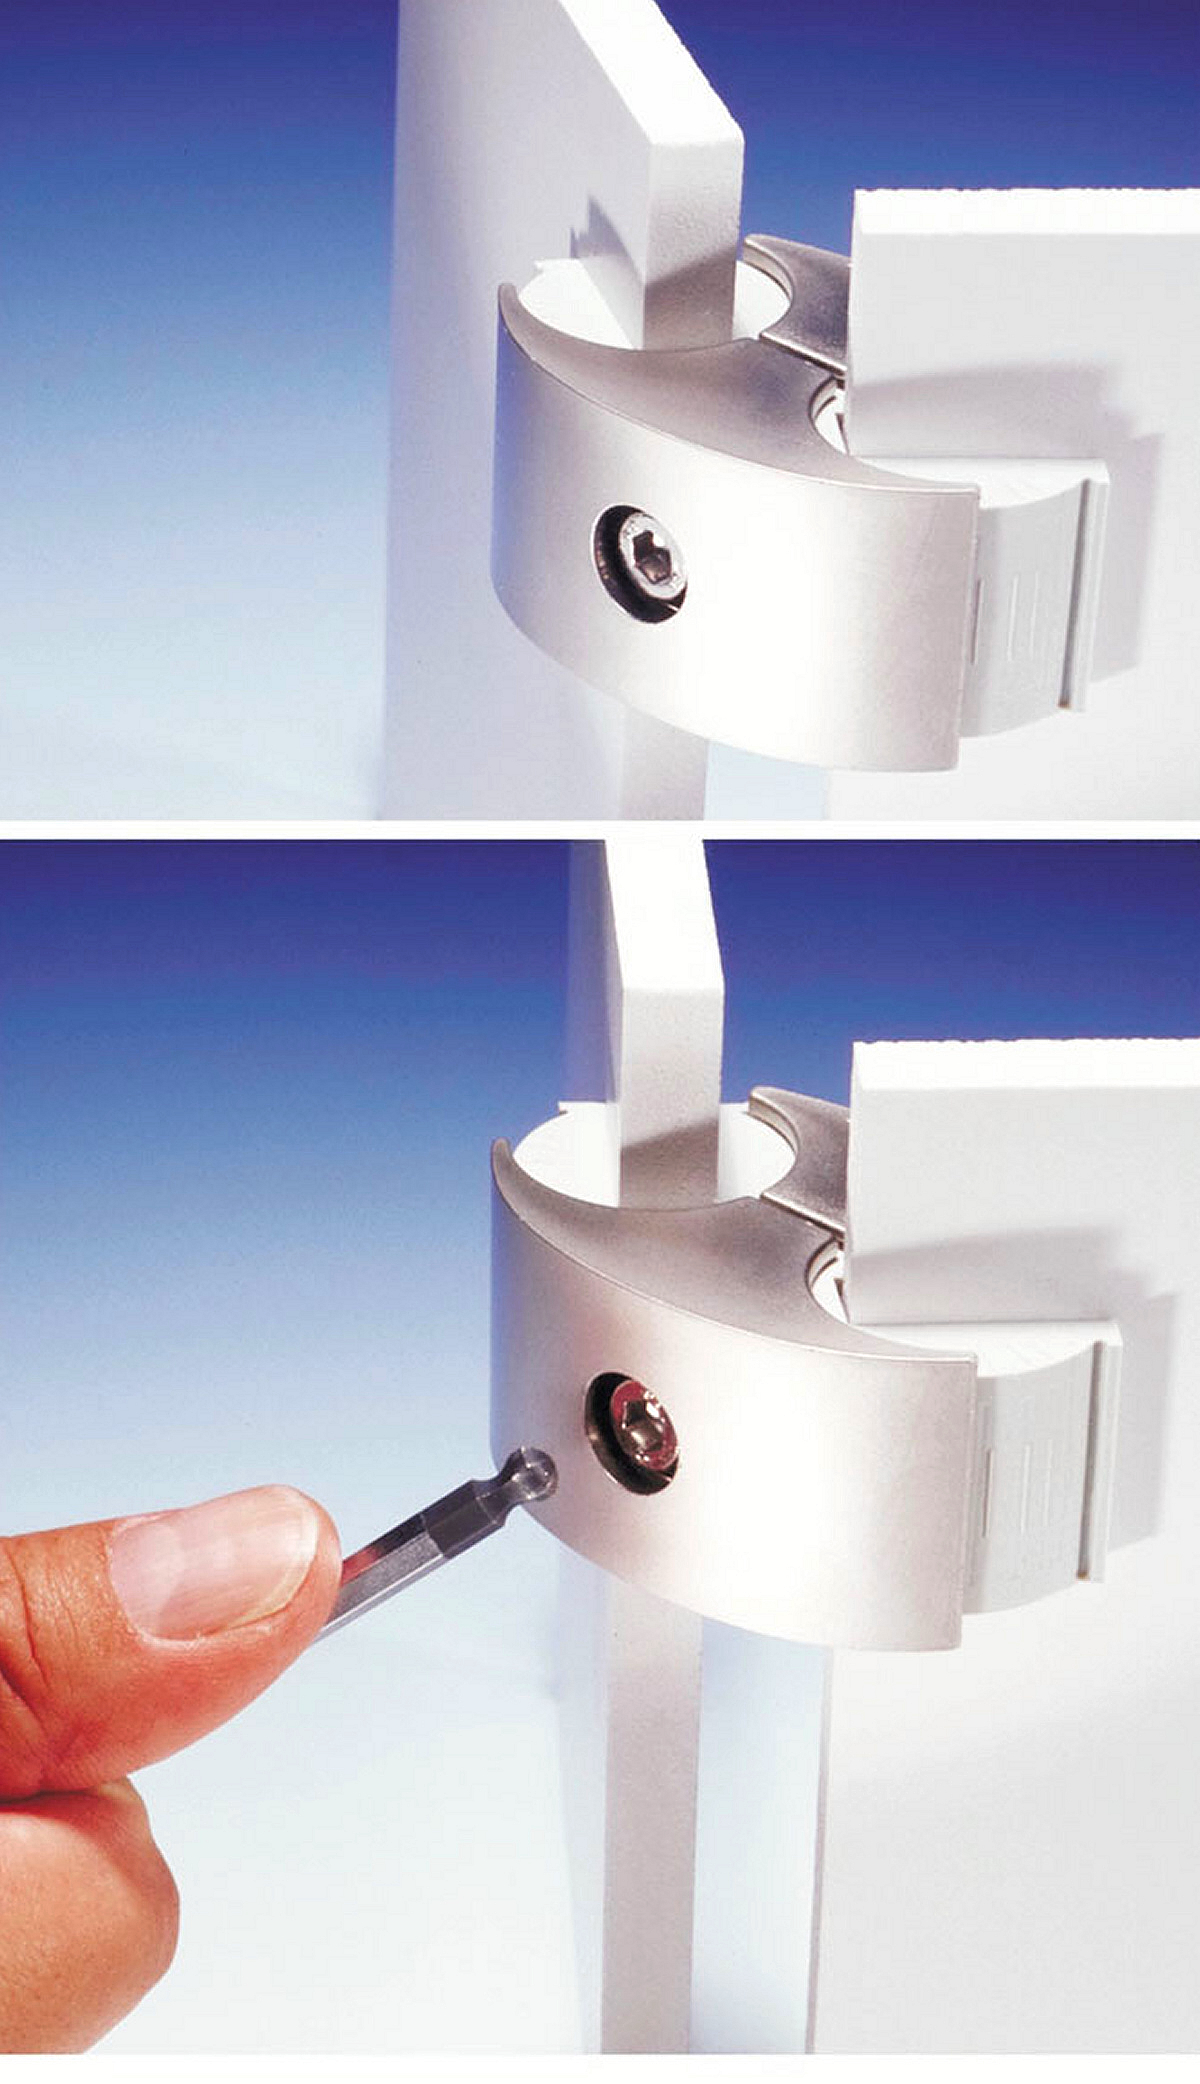 Outwater’s KLEM® Connector